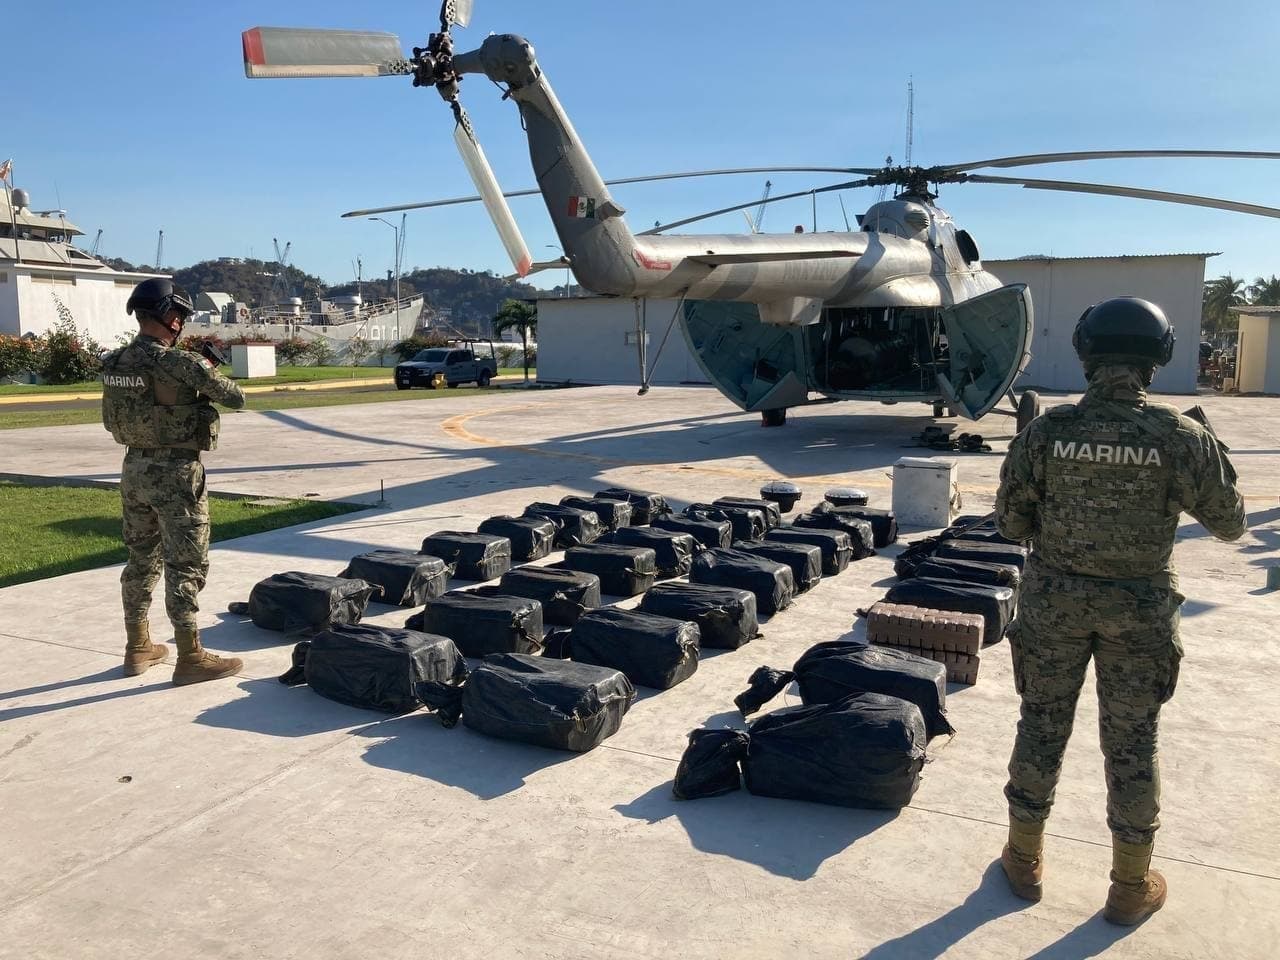 After persecution, Semar secures 731 kilos of cocaine in Michoacán